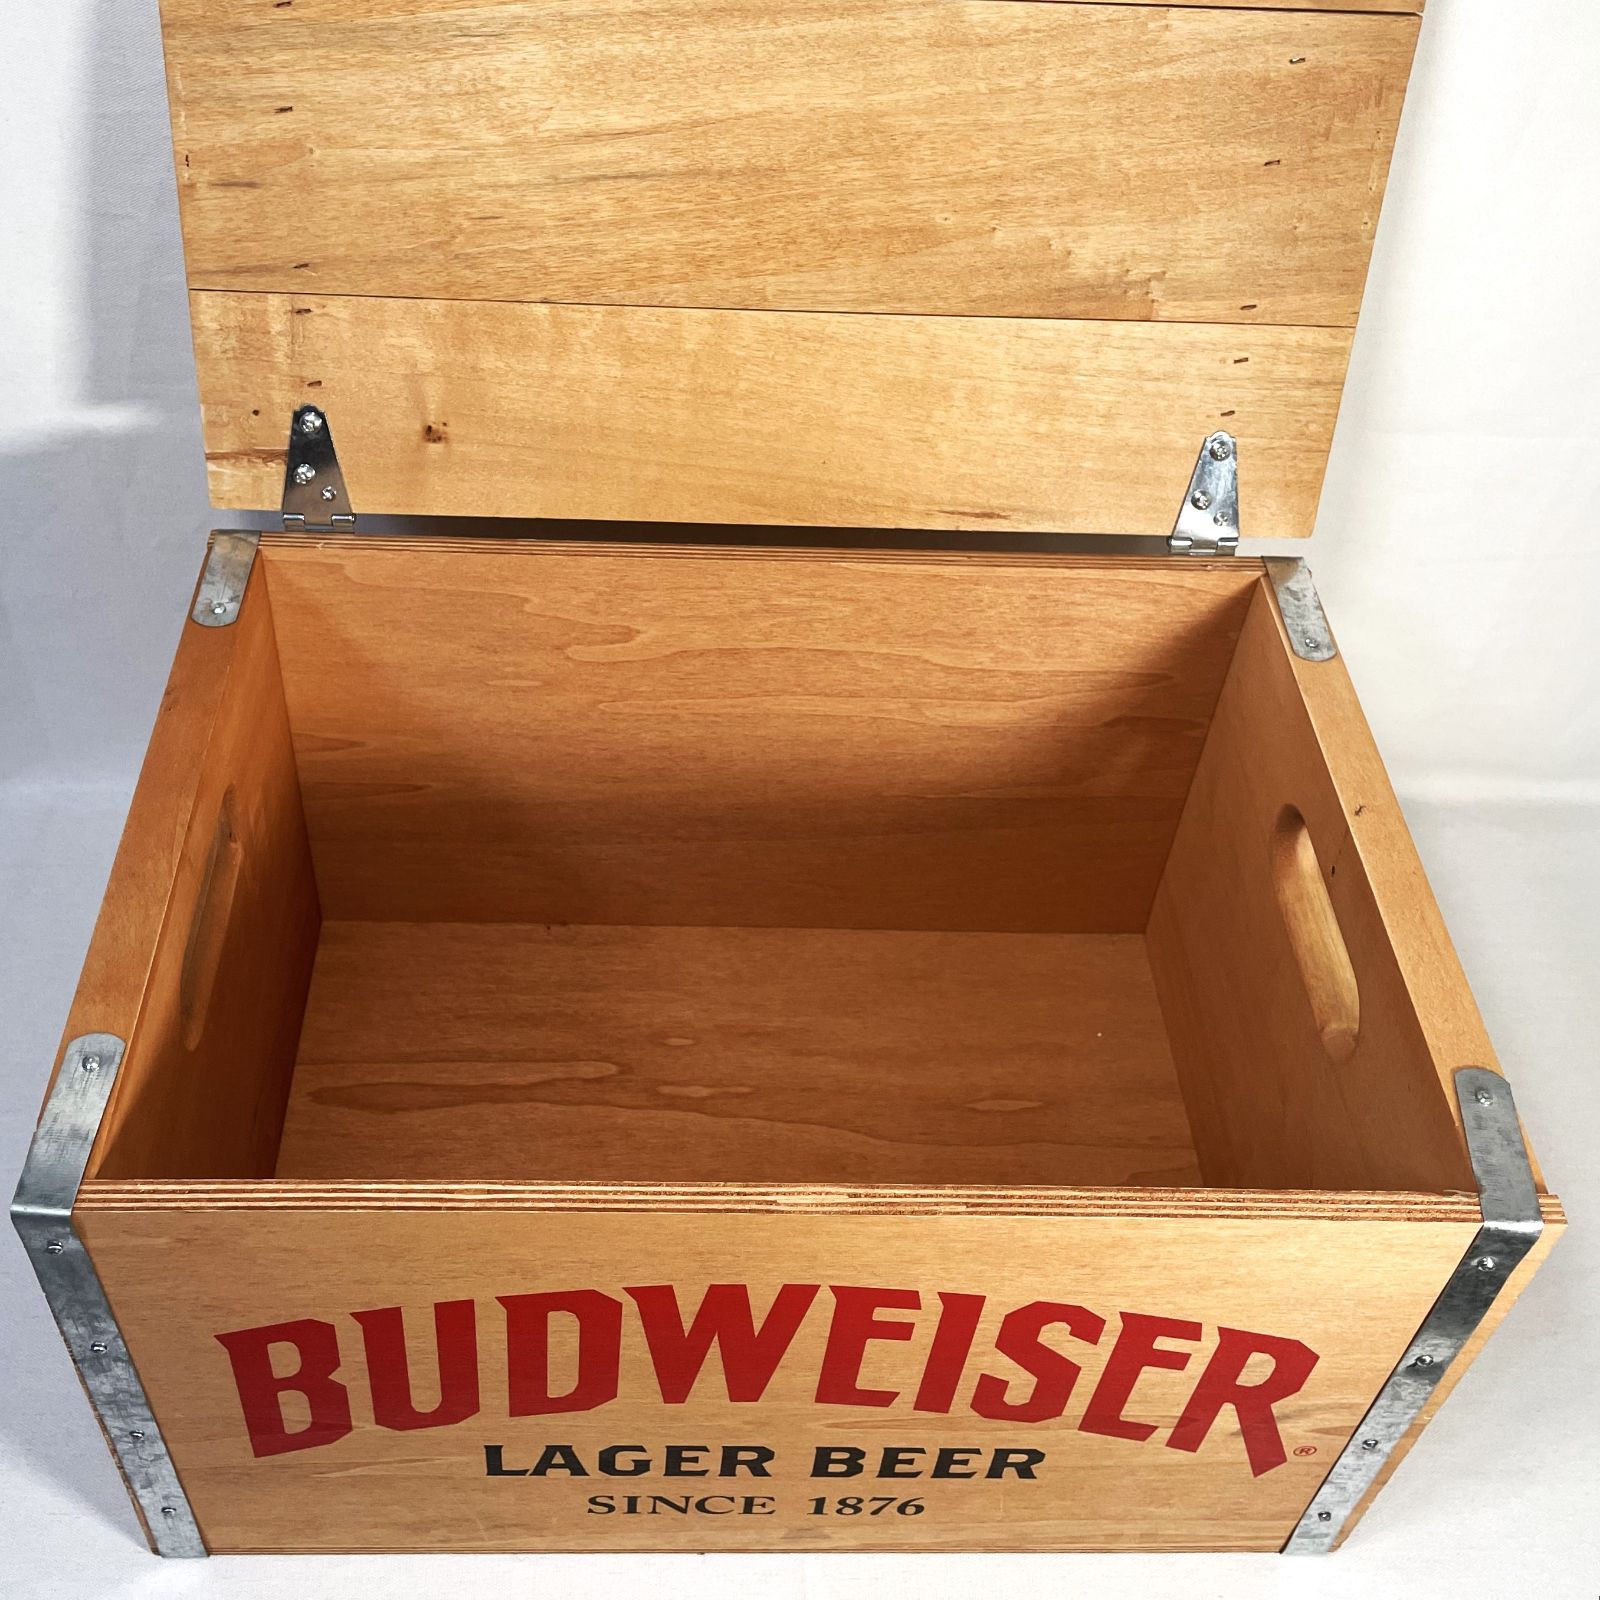 Budweiser Wooden Crate Limited Edition バドワイザー ウッドボックス